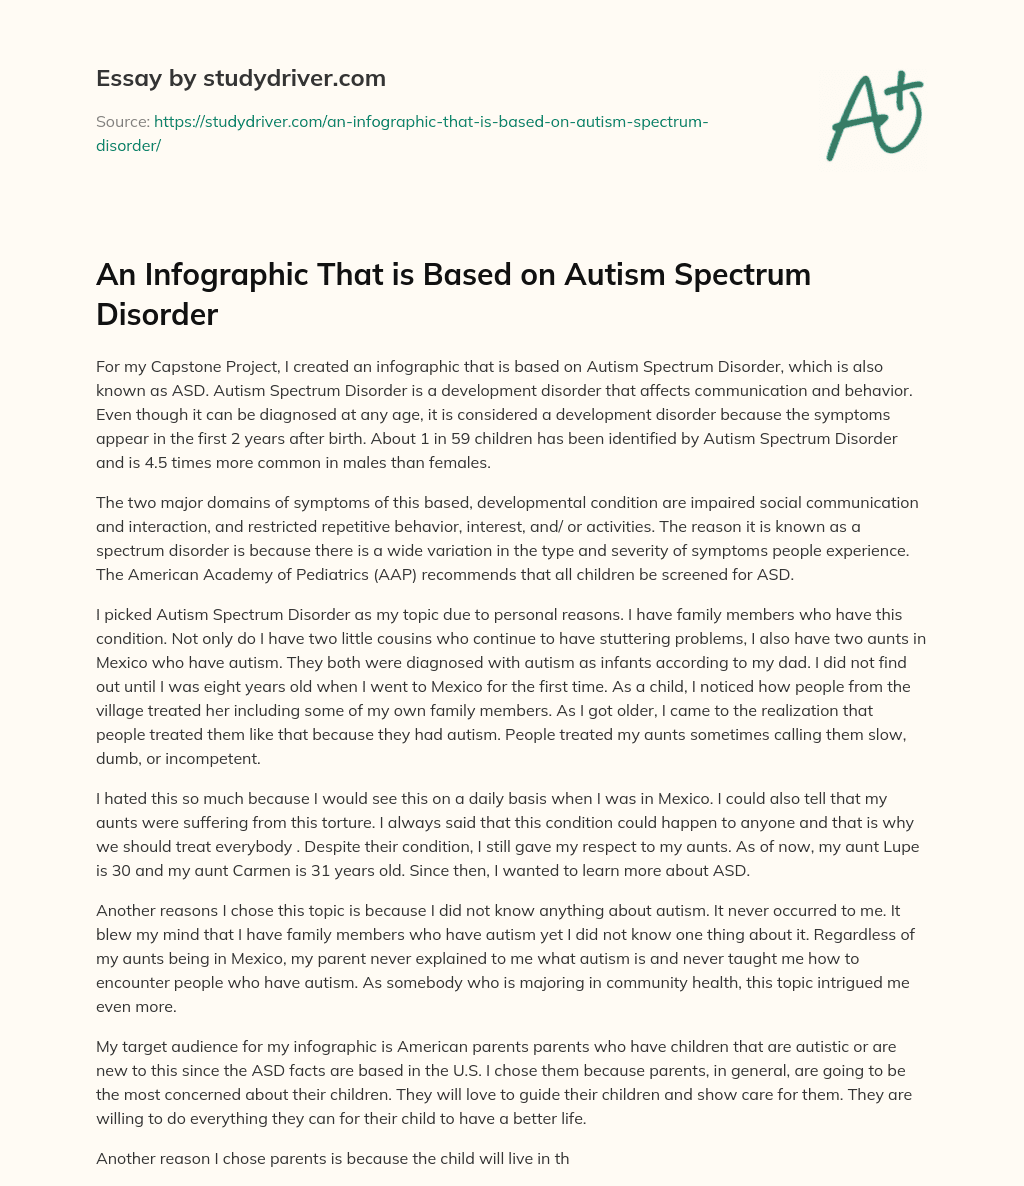 An Infographic that is Based on Autism Spectrum Disorder essay